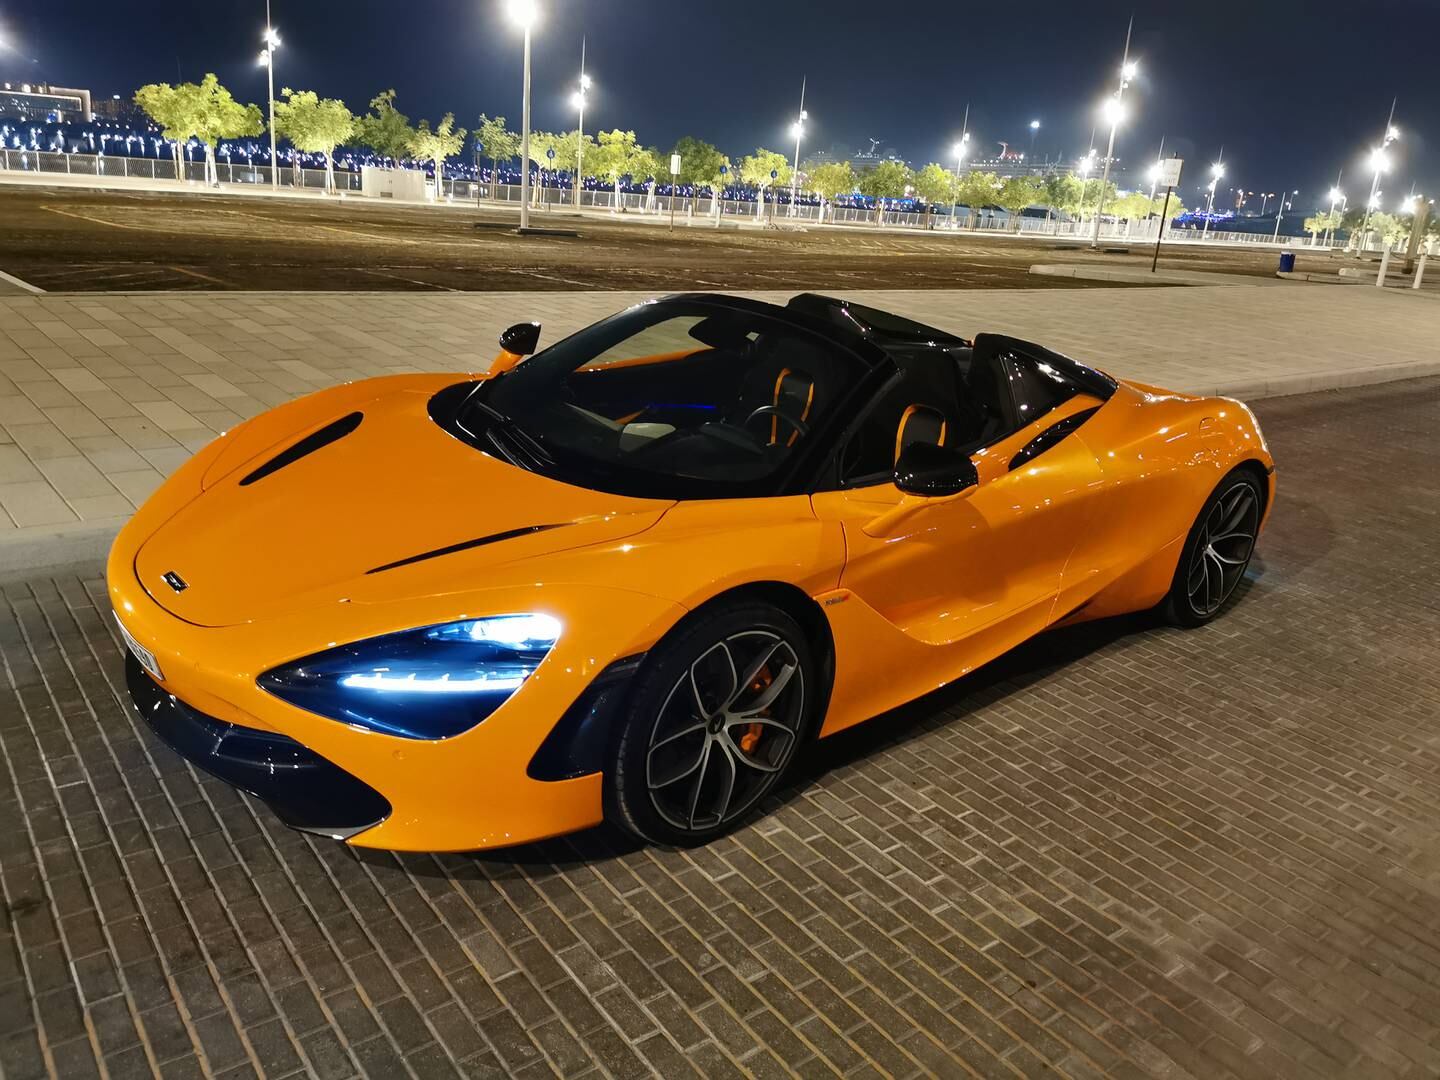 The McLaren 720S Spider is only one of the new models the supercar company is planning to launch. Photo: Damien Reid